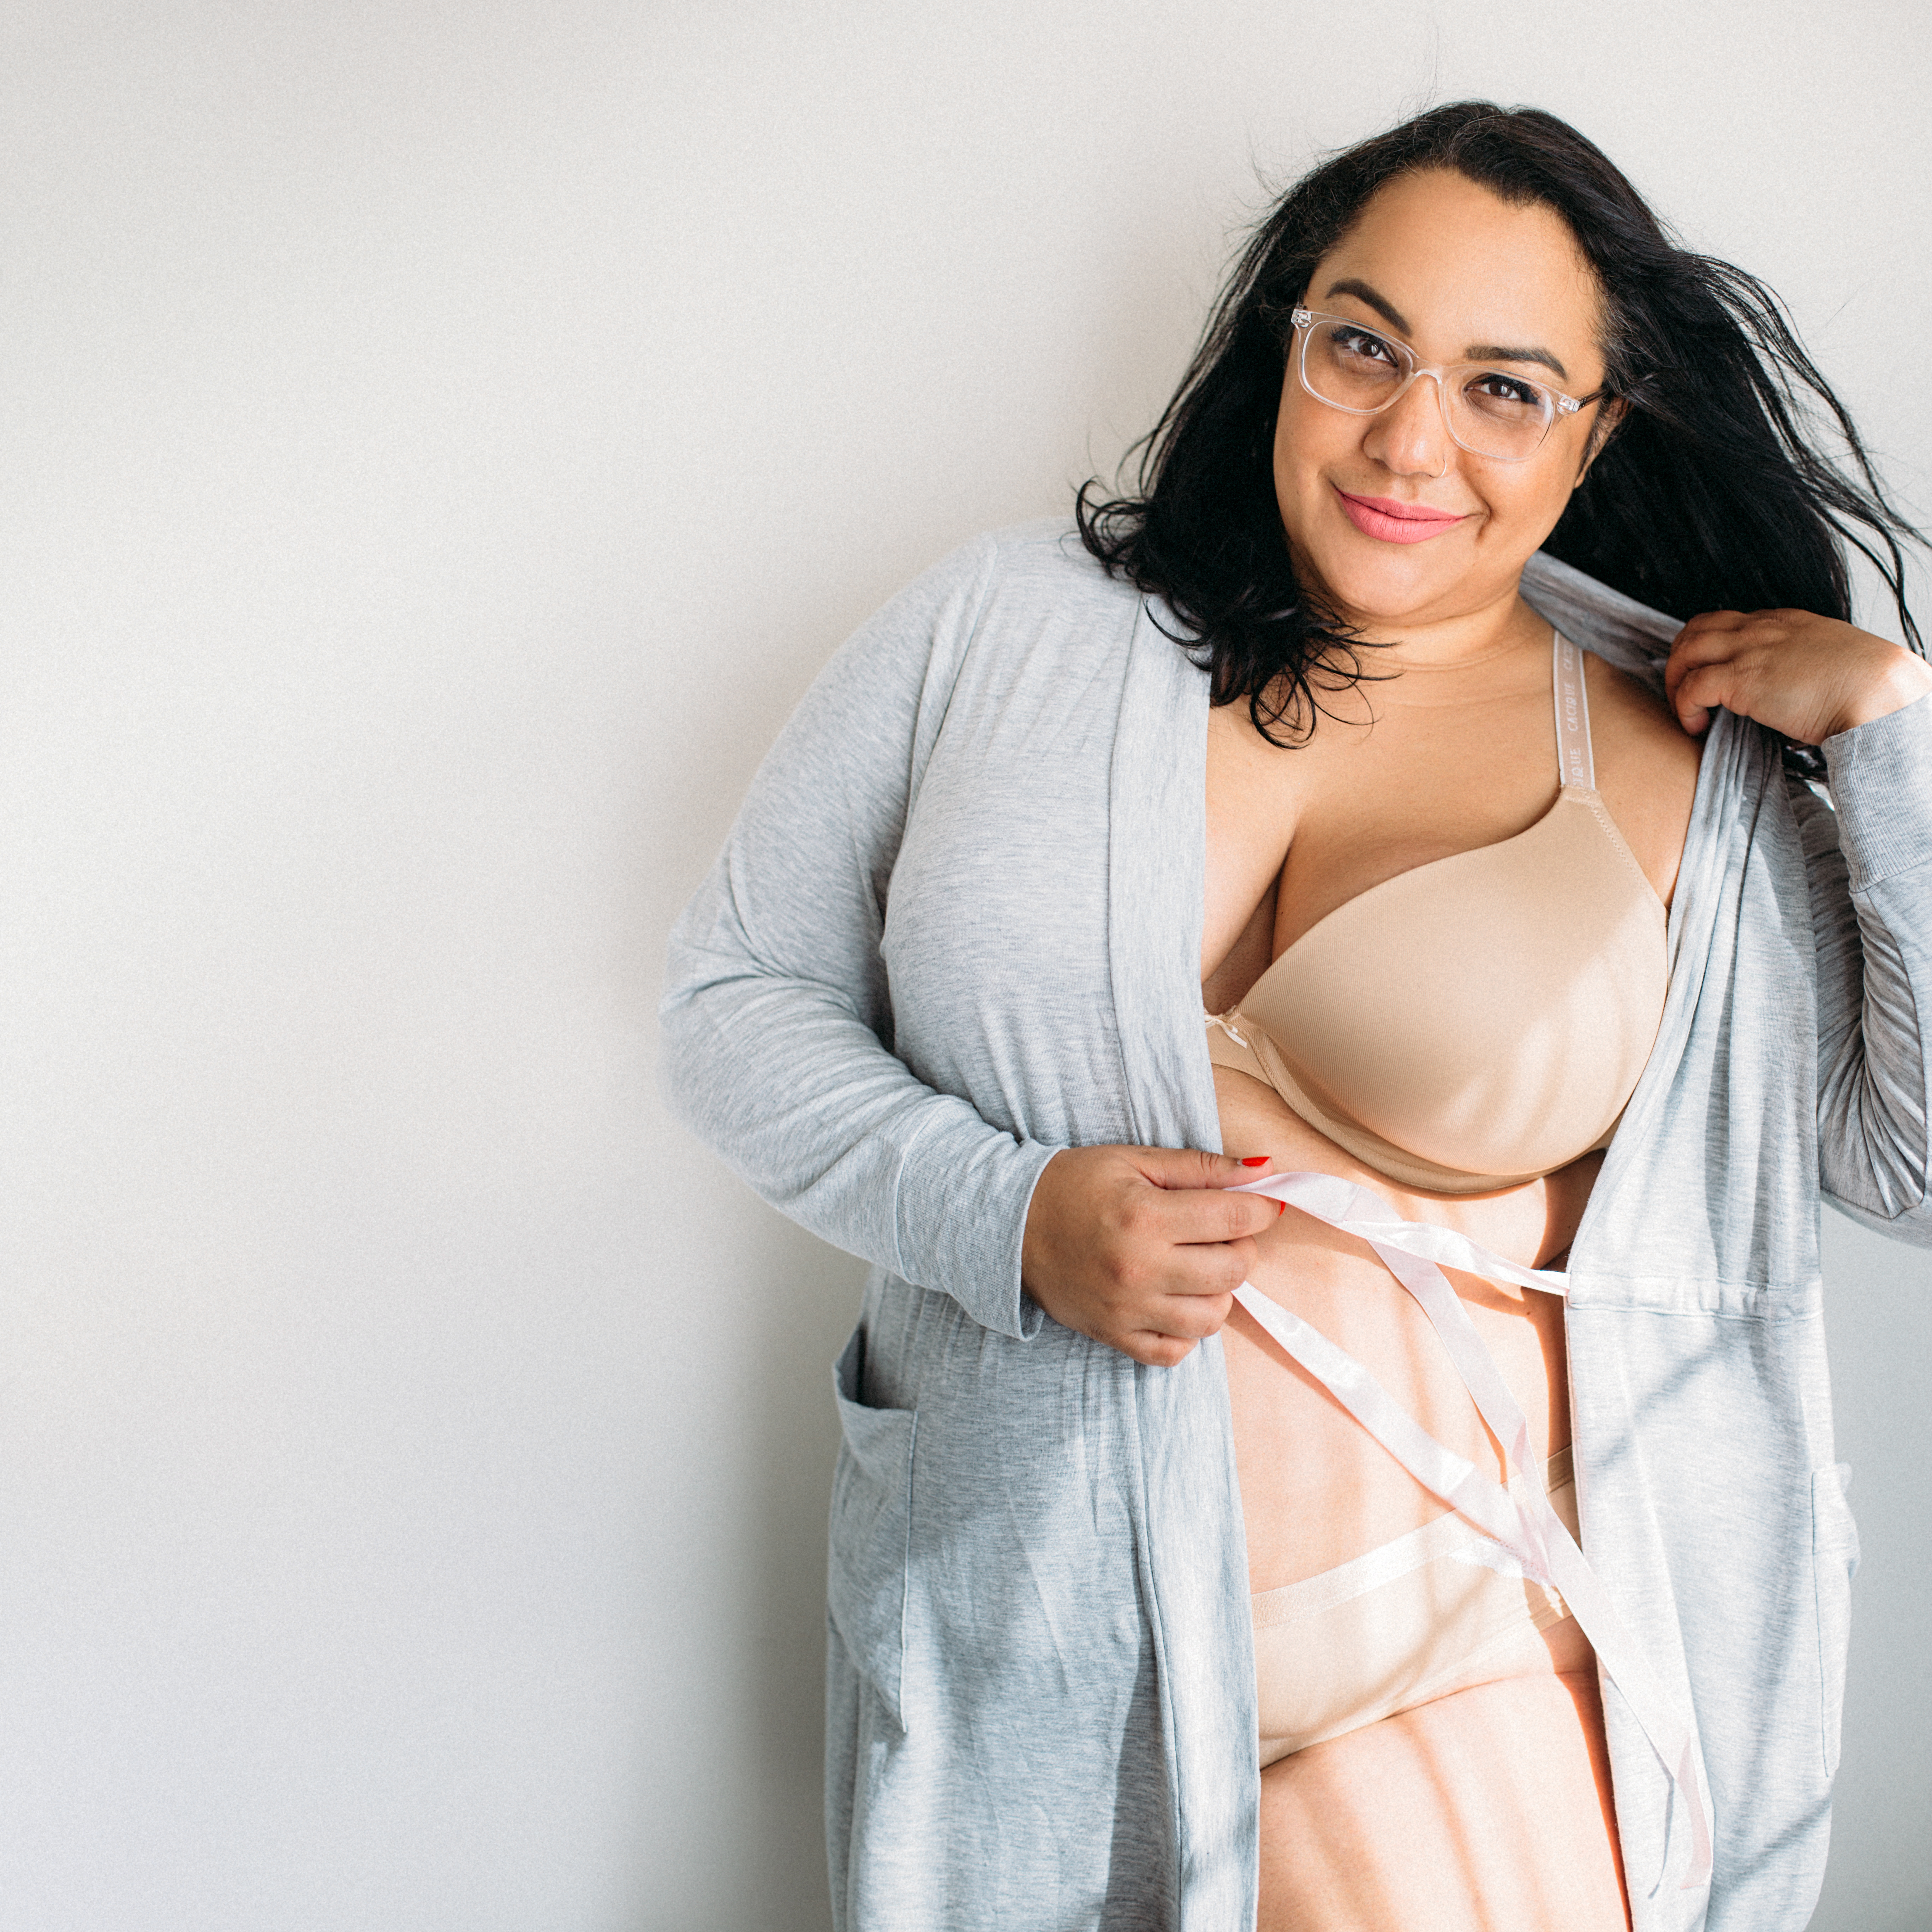 The Chief of Style in Lane Bryant Cacique So Light Soft Plunge Plus Size Bra, Panties, and Bathrobe